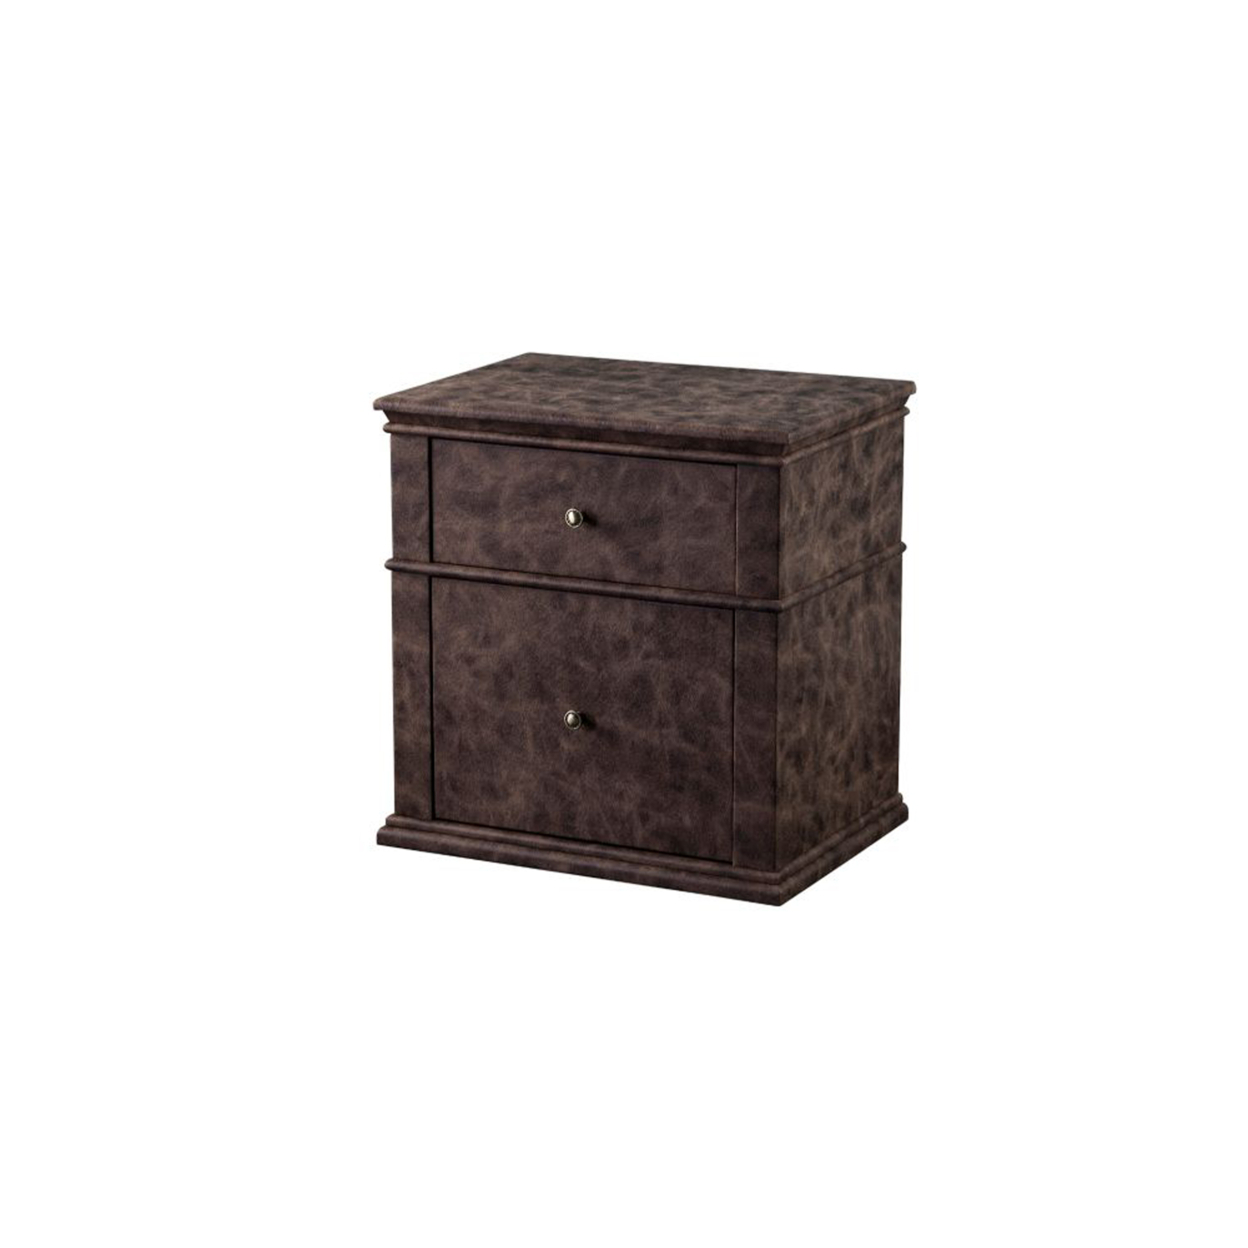 Leatherette Upholstered Wooden Nightstand With Two Drawers, Brown- Saltoro Sherpi